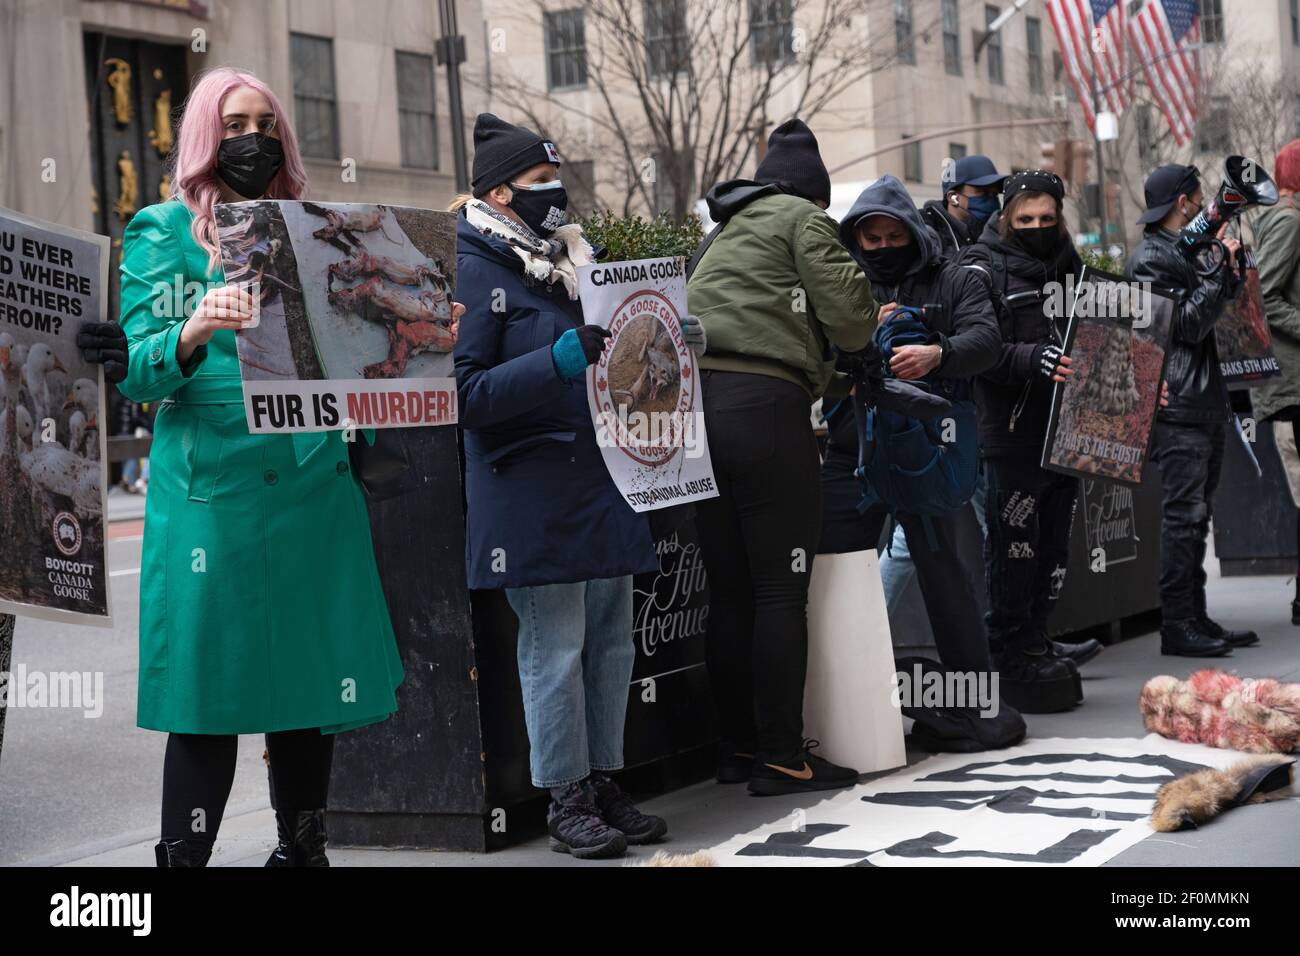 New York, United States. 06th Mar, 2021. Activists hold placards during the  demonstration.Animal rights activists held a peaceful protest in front of  Saks Fifth Avenue. Protest against the Canada goose brand specifically,